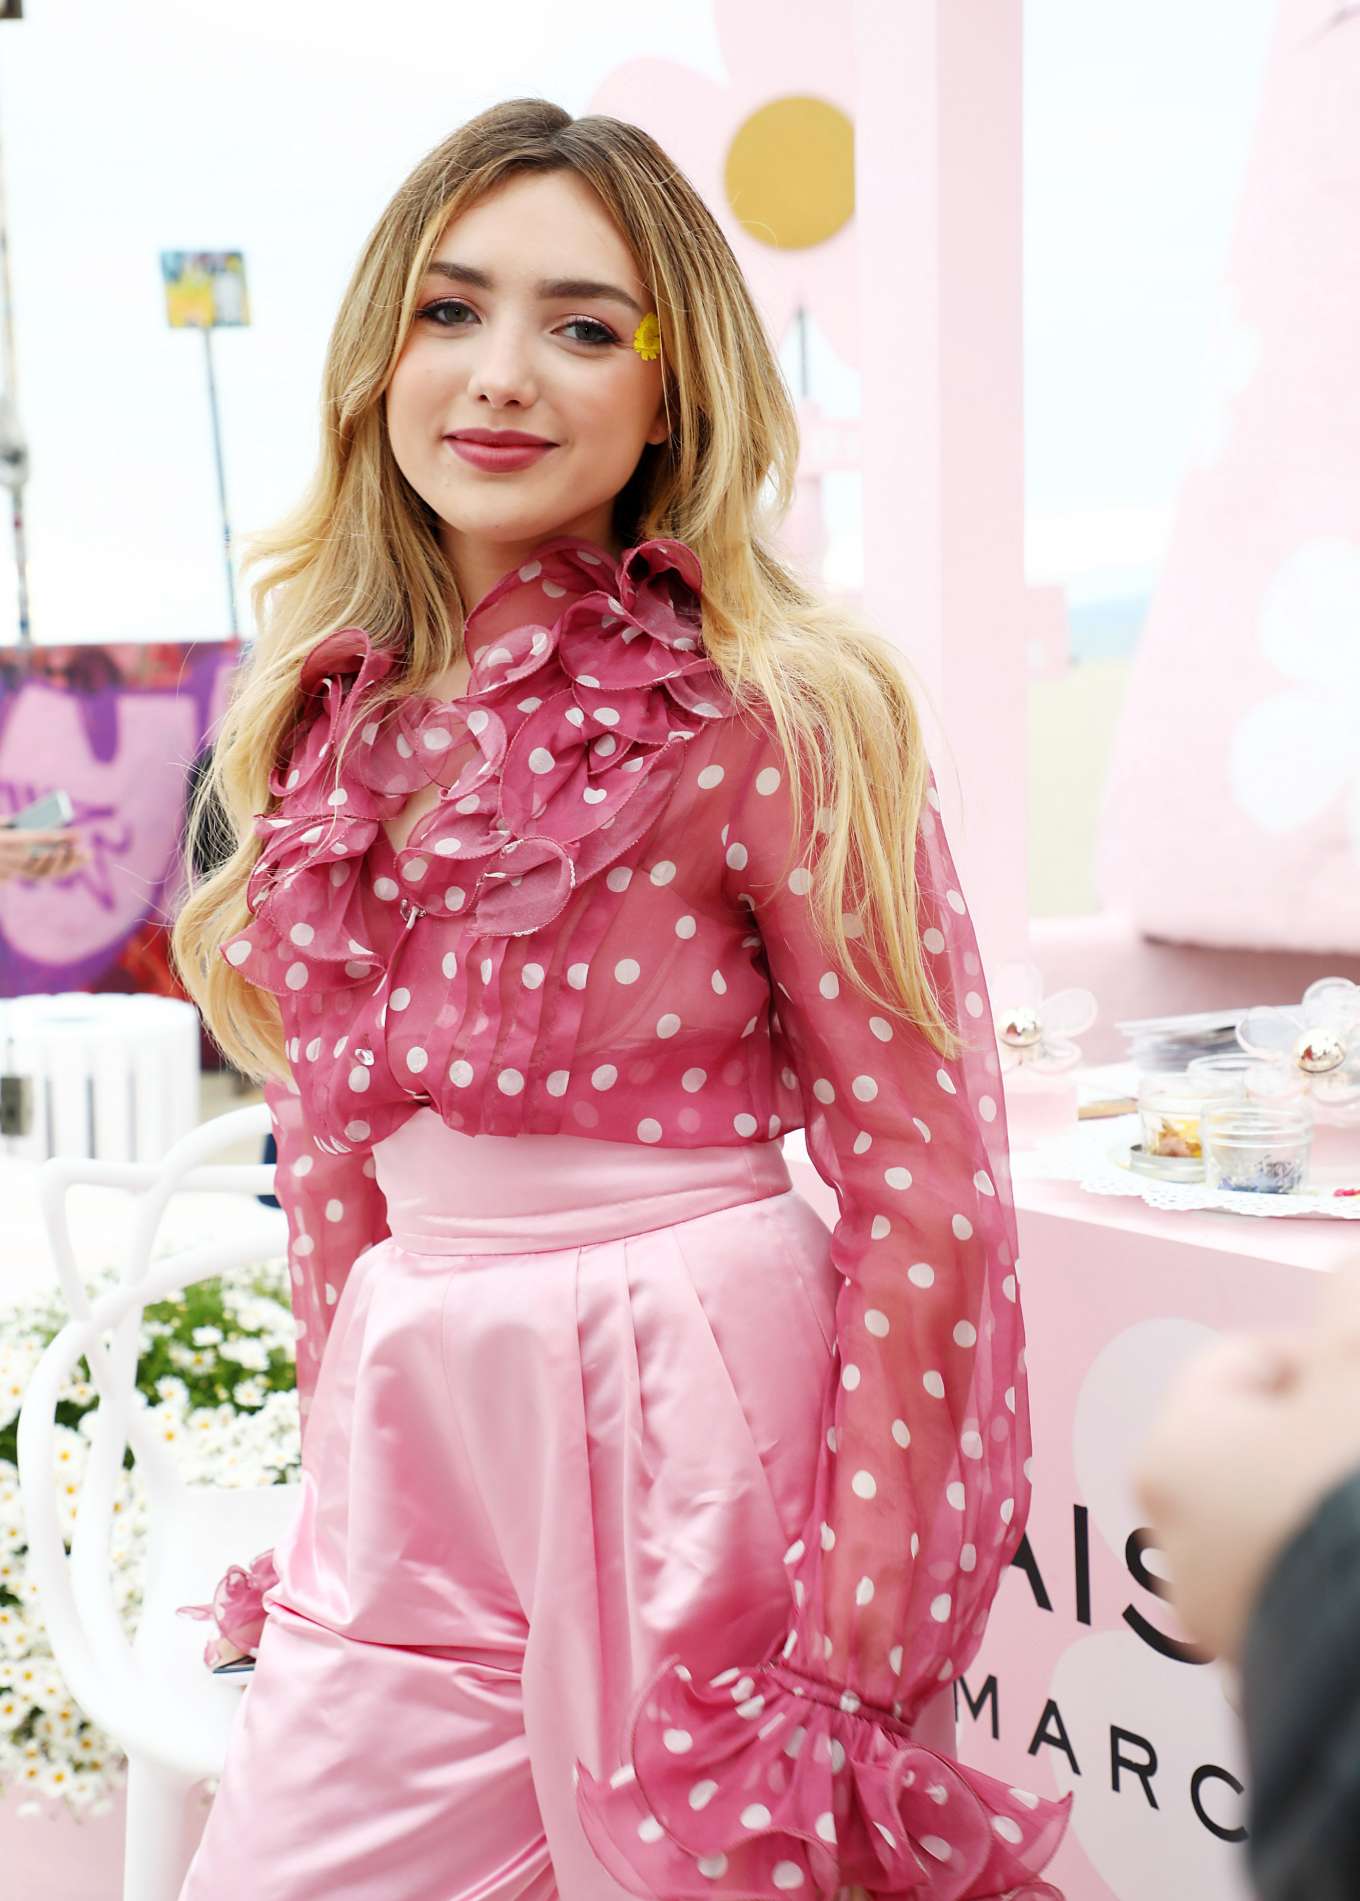 Peyton R List - Marc Jacobs Daisy Love 'So Sweet' Fragrance Popup Event in LA